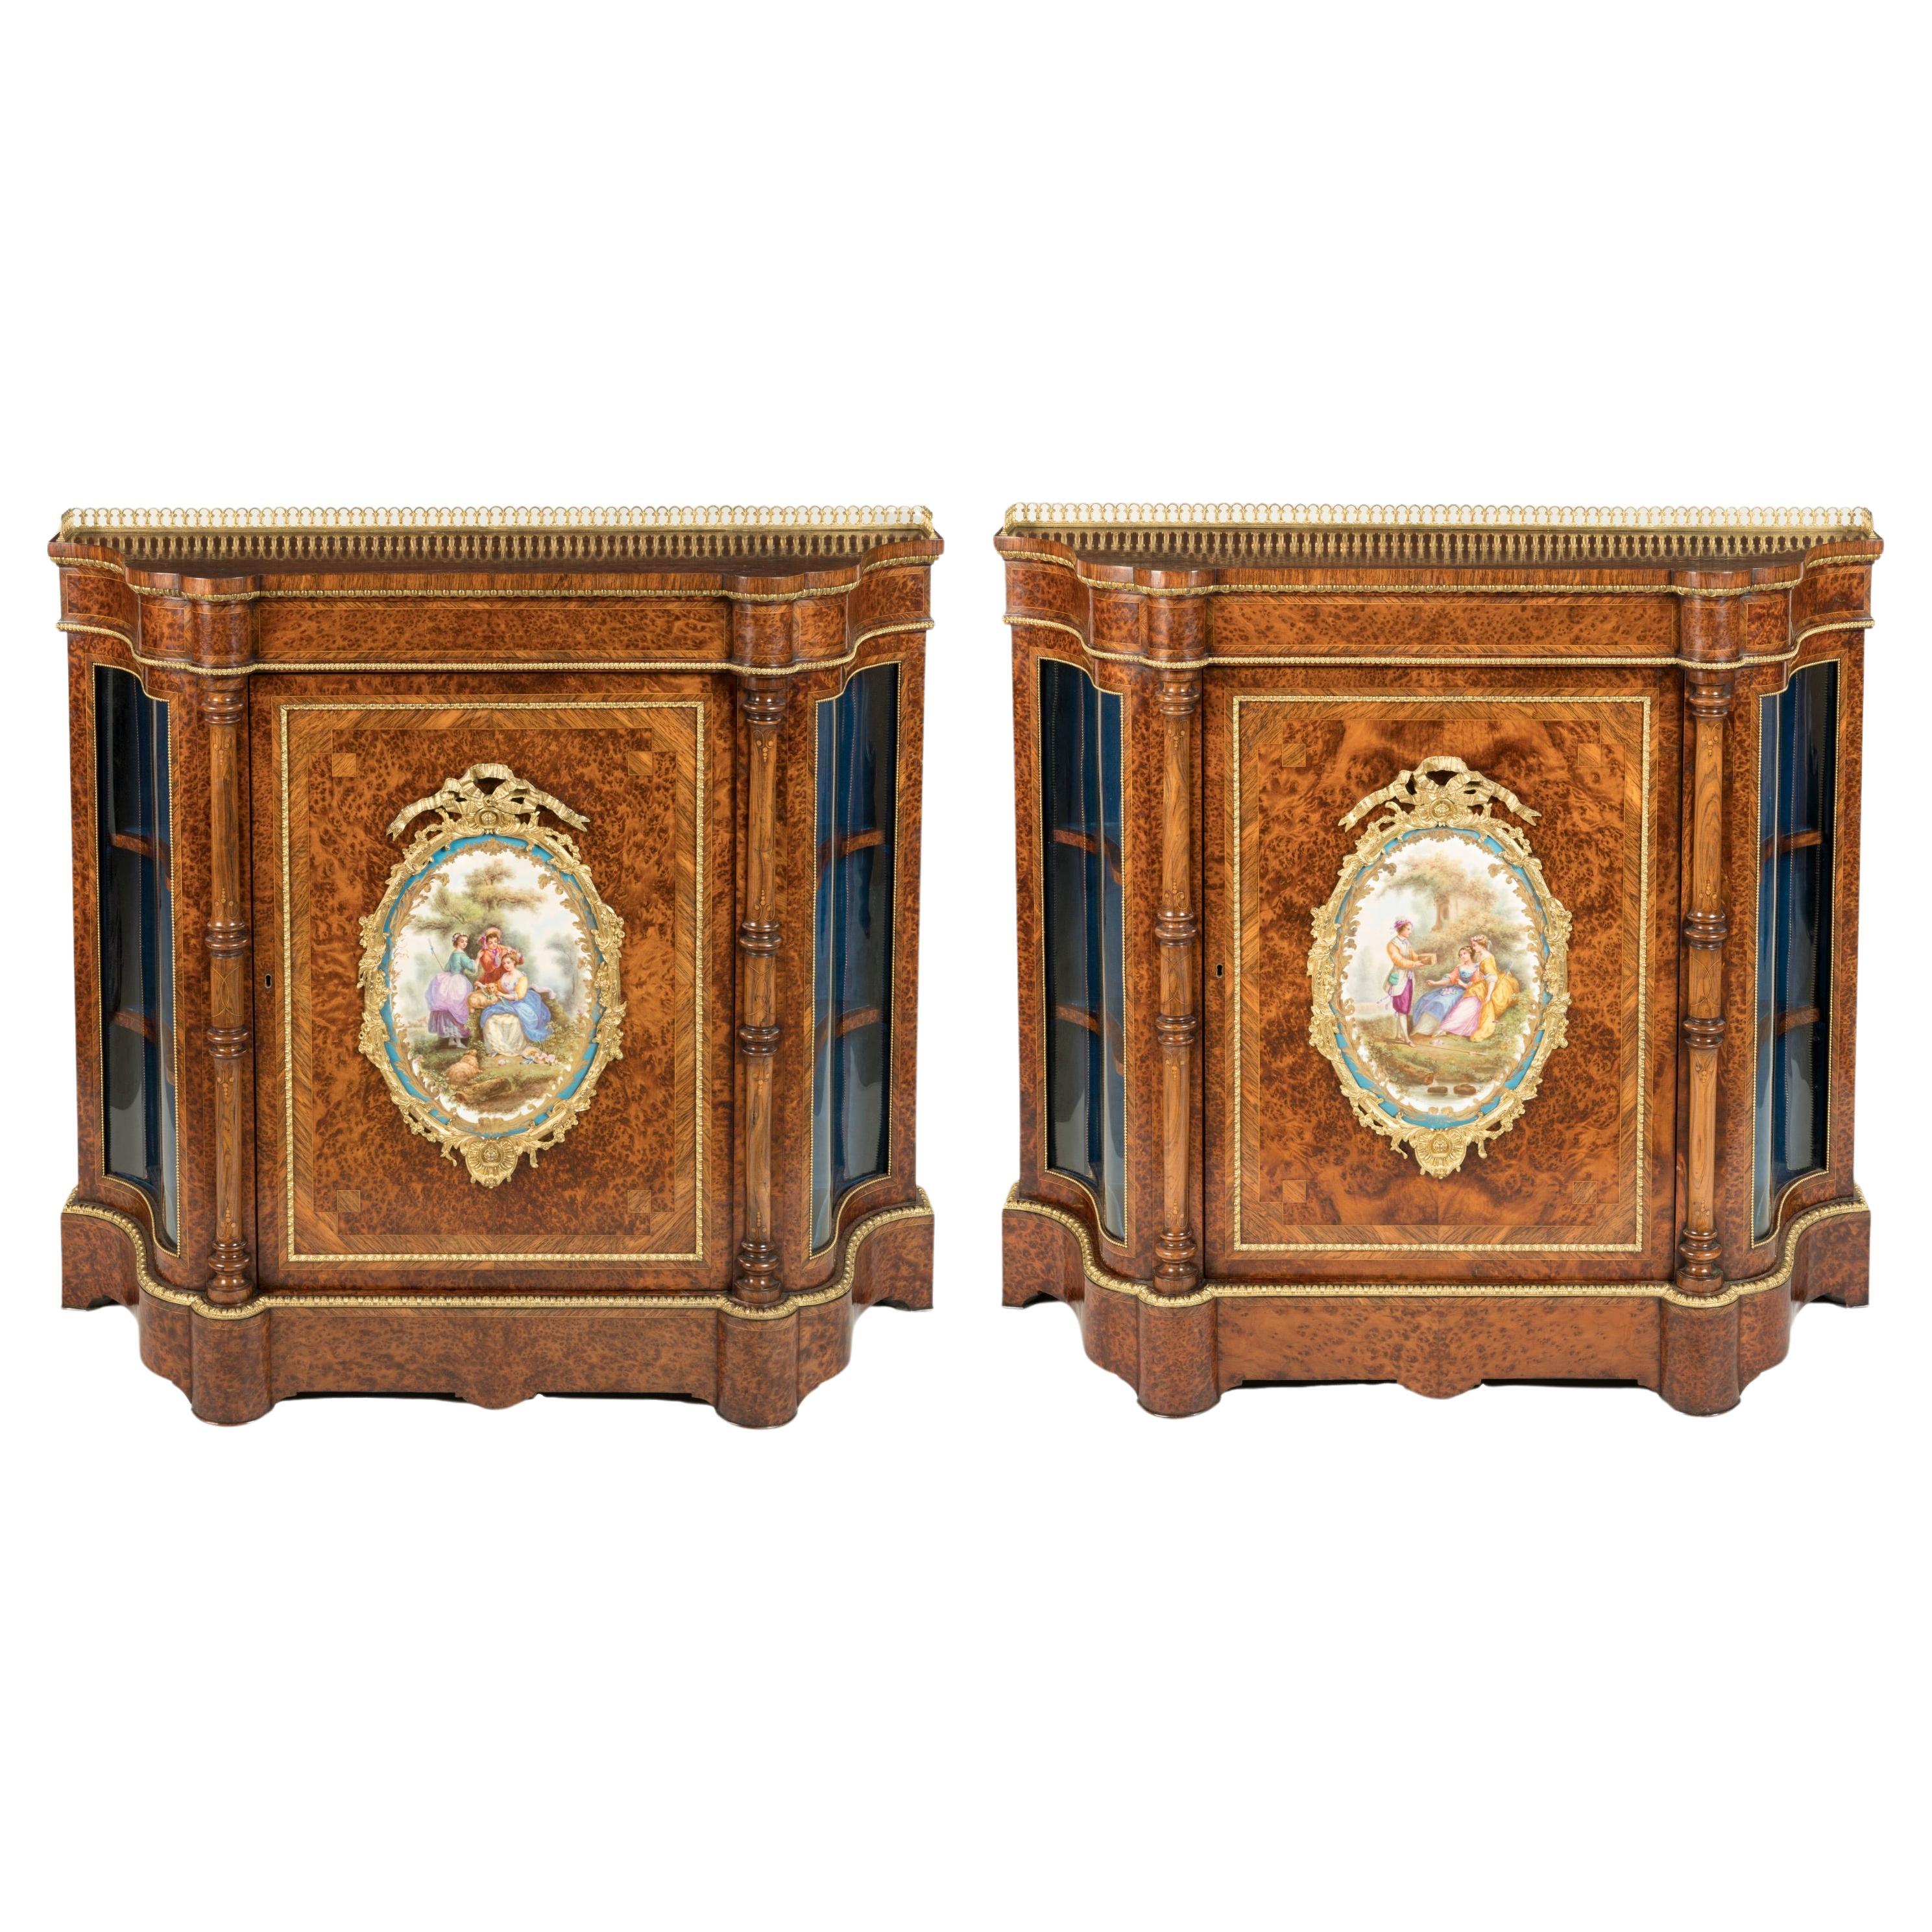 Pair of English Mid-19th Century Porcelain Mounted Thuyawood Cabinets